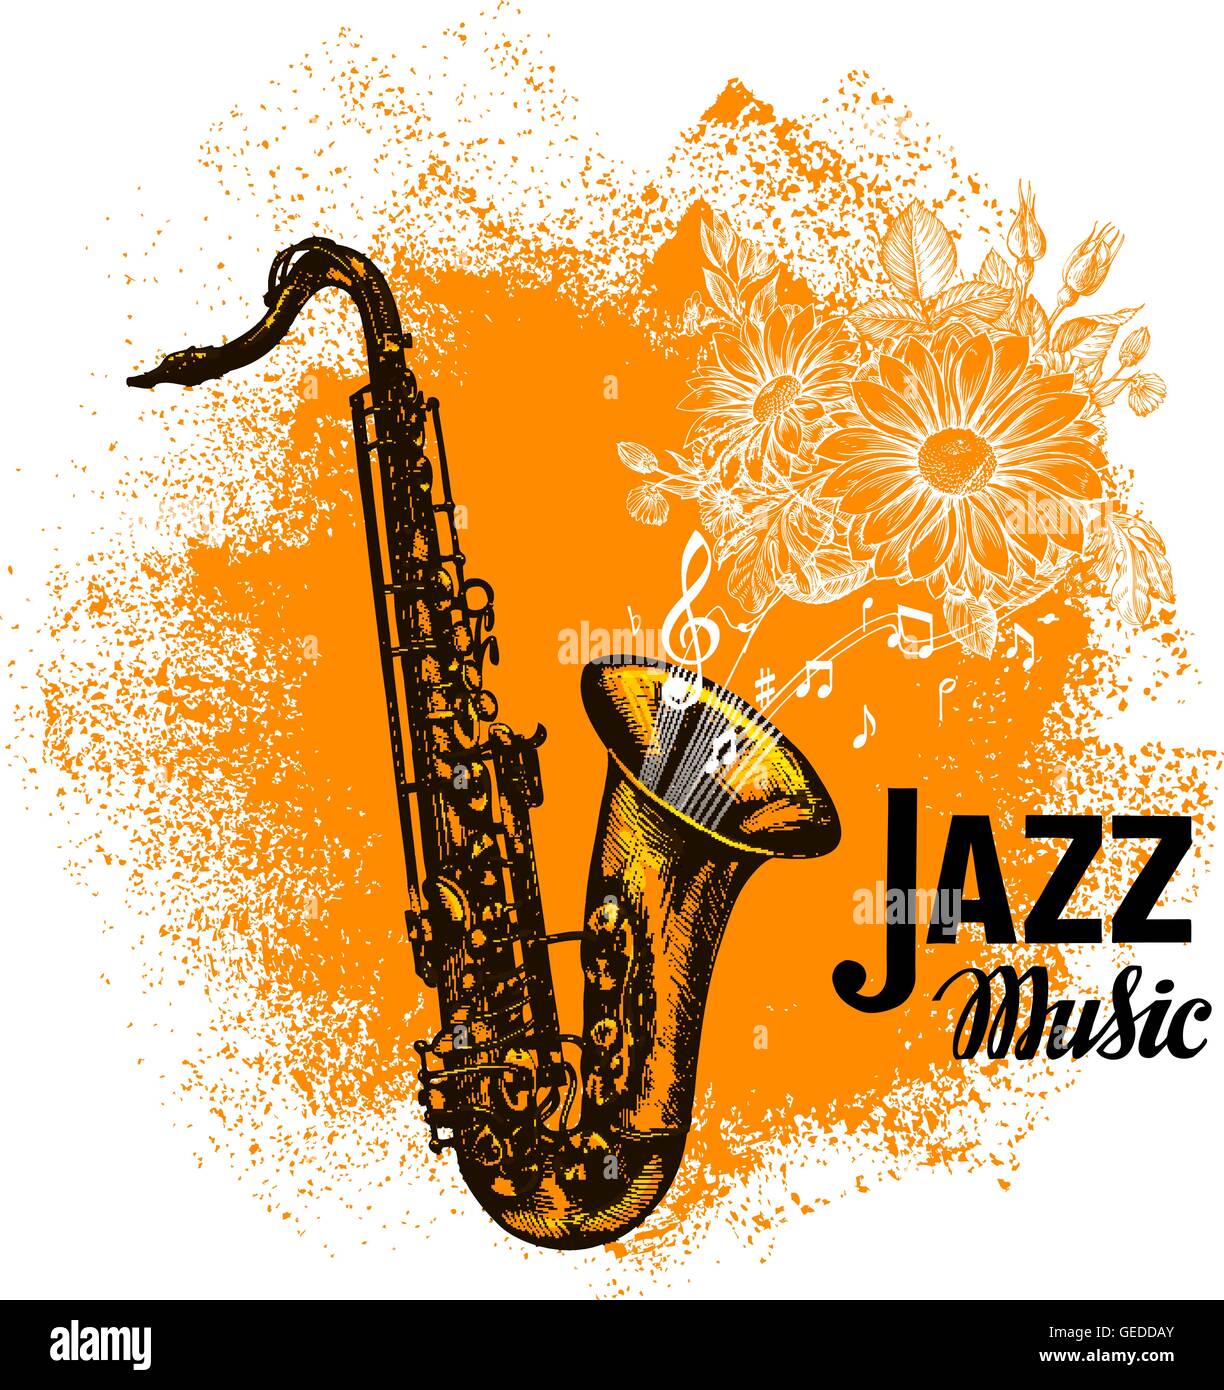 Jazz music. Classical saxophone with musical notes. Vector illustration Stock Vector